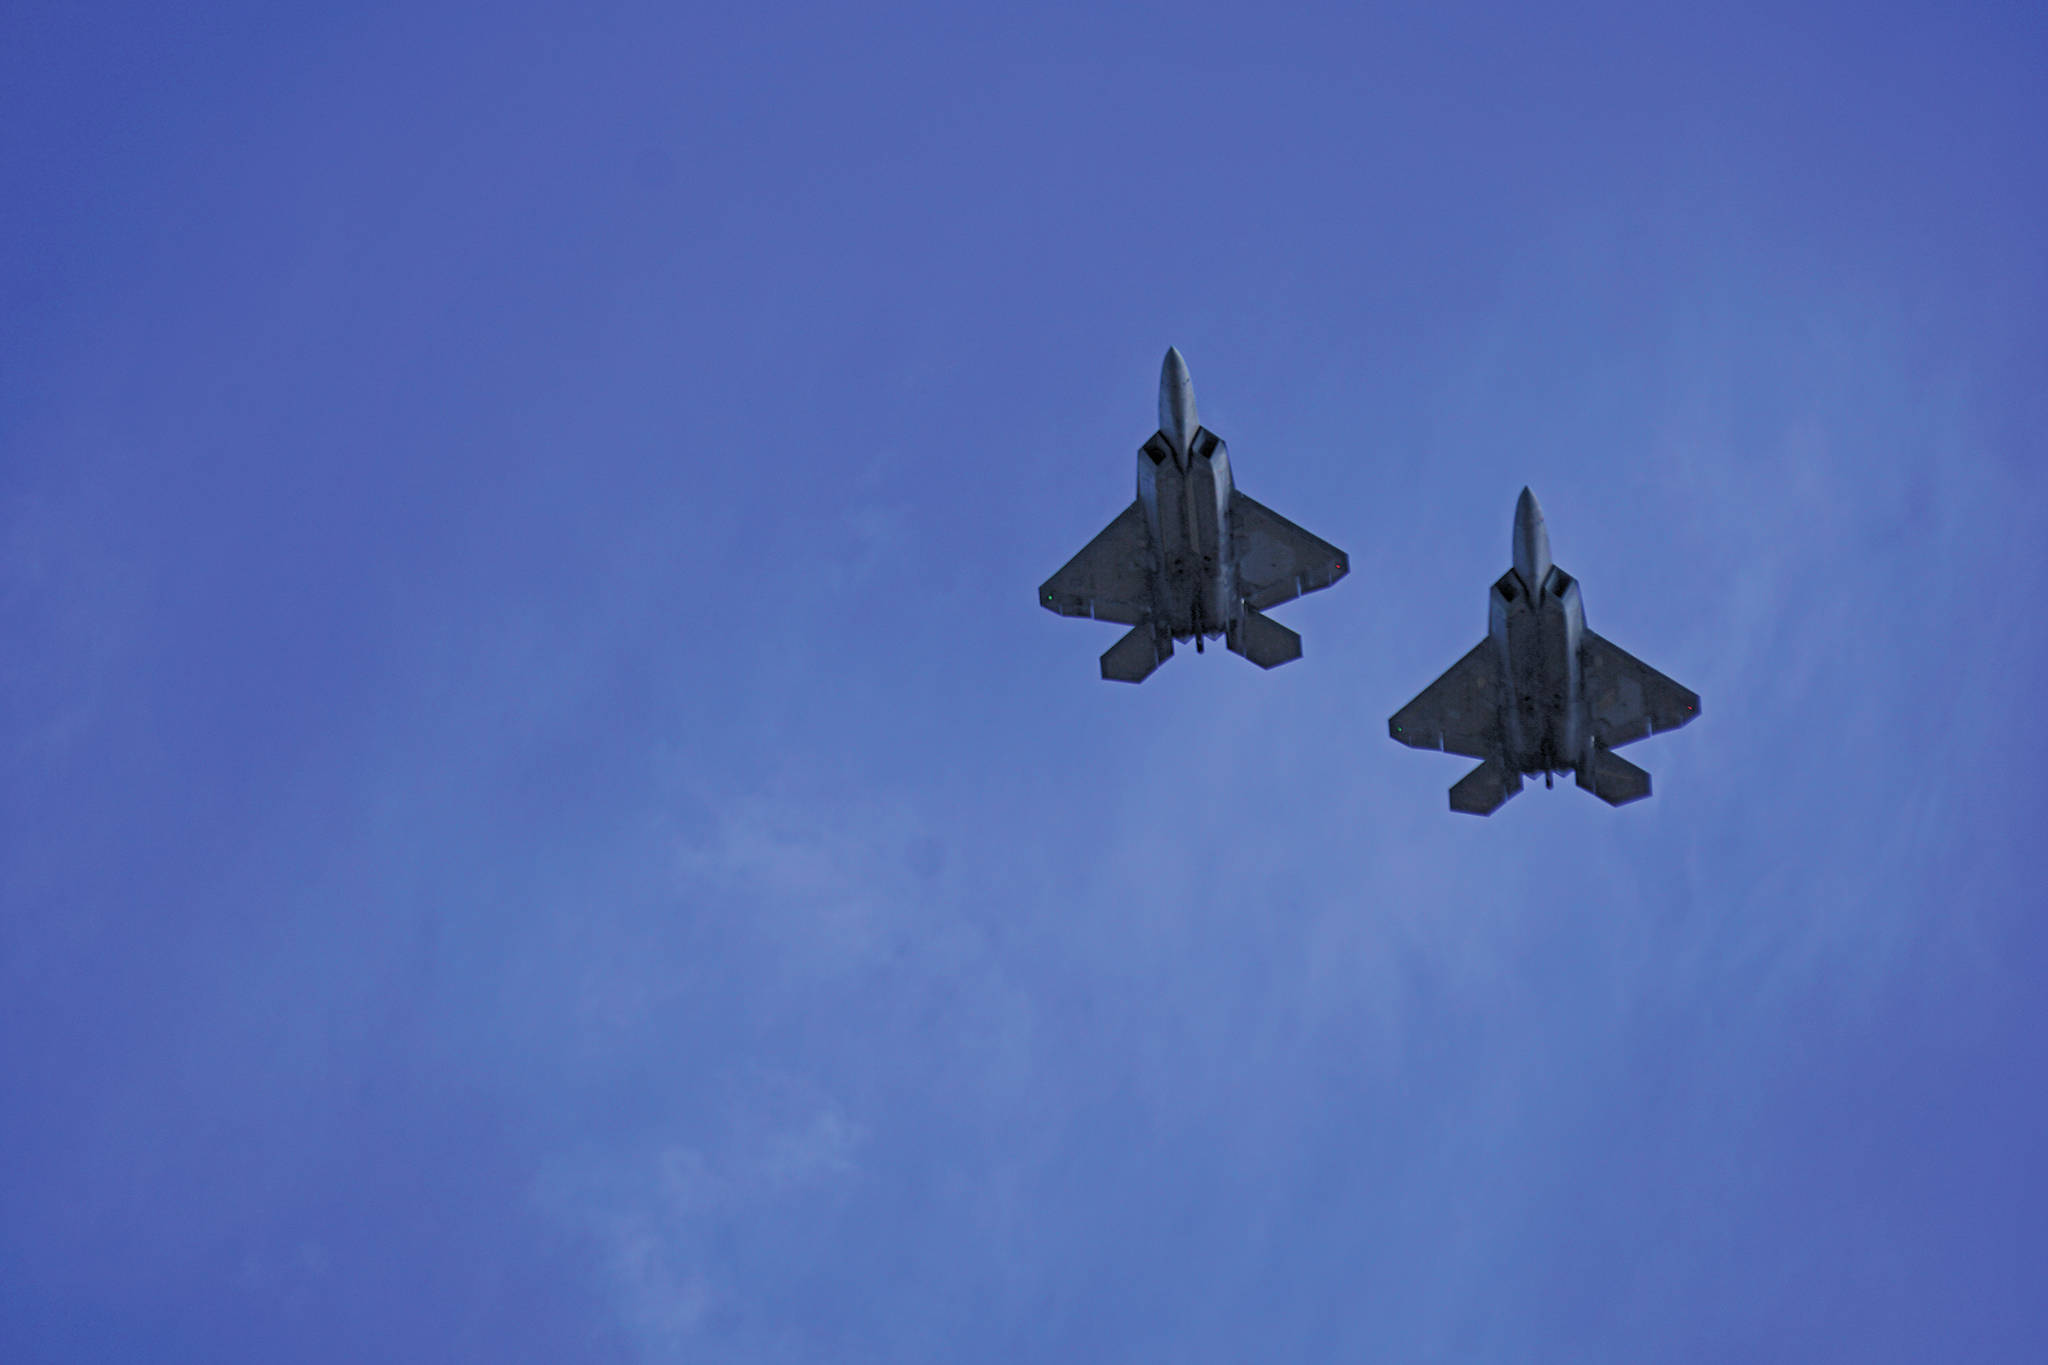 Two of four F-22 Raptors from the U.S. Air Force 3rd wing, Joint Base Elmendorf Richardson, fly over downtown Homer, Alaska on Friday, May 15, 2020, as part of an exercise to honor Alaska first responders and health care workers. (Photo by Michael Armstrong/Homer News)